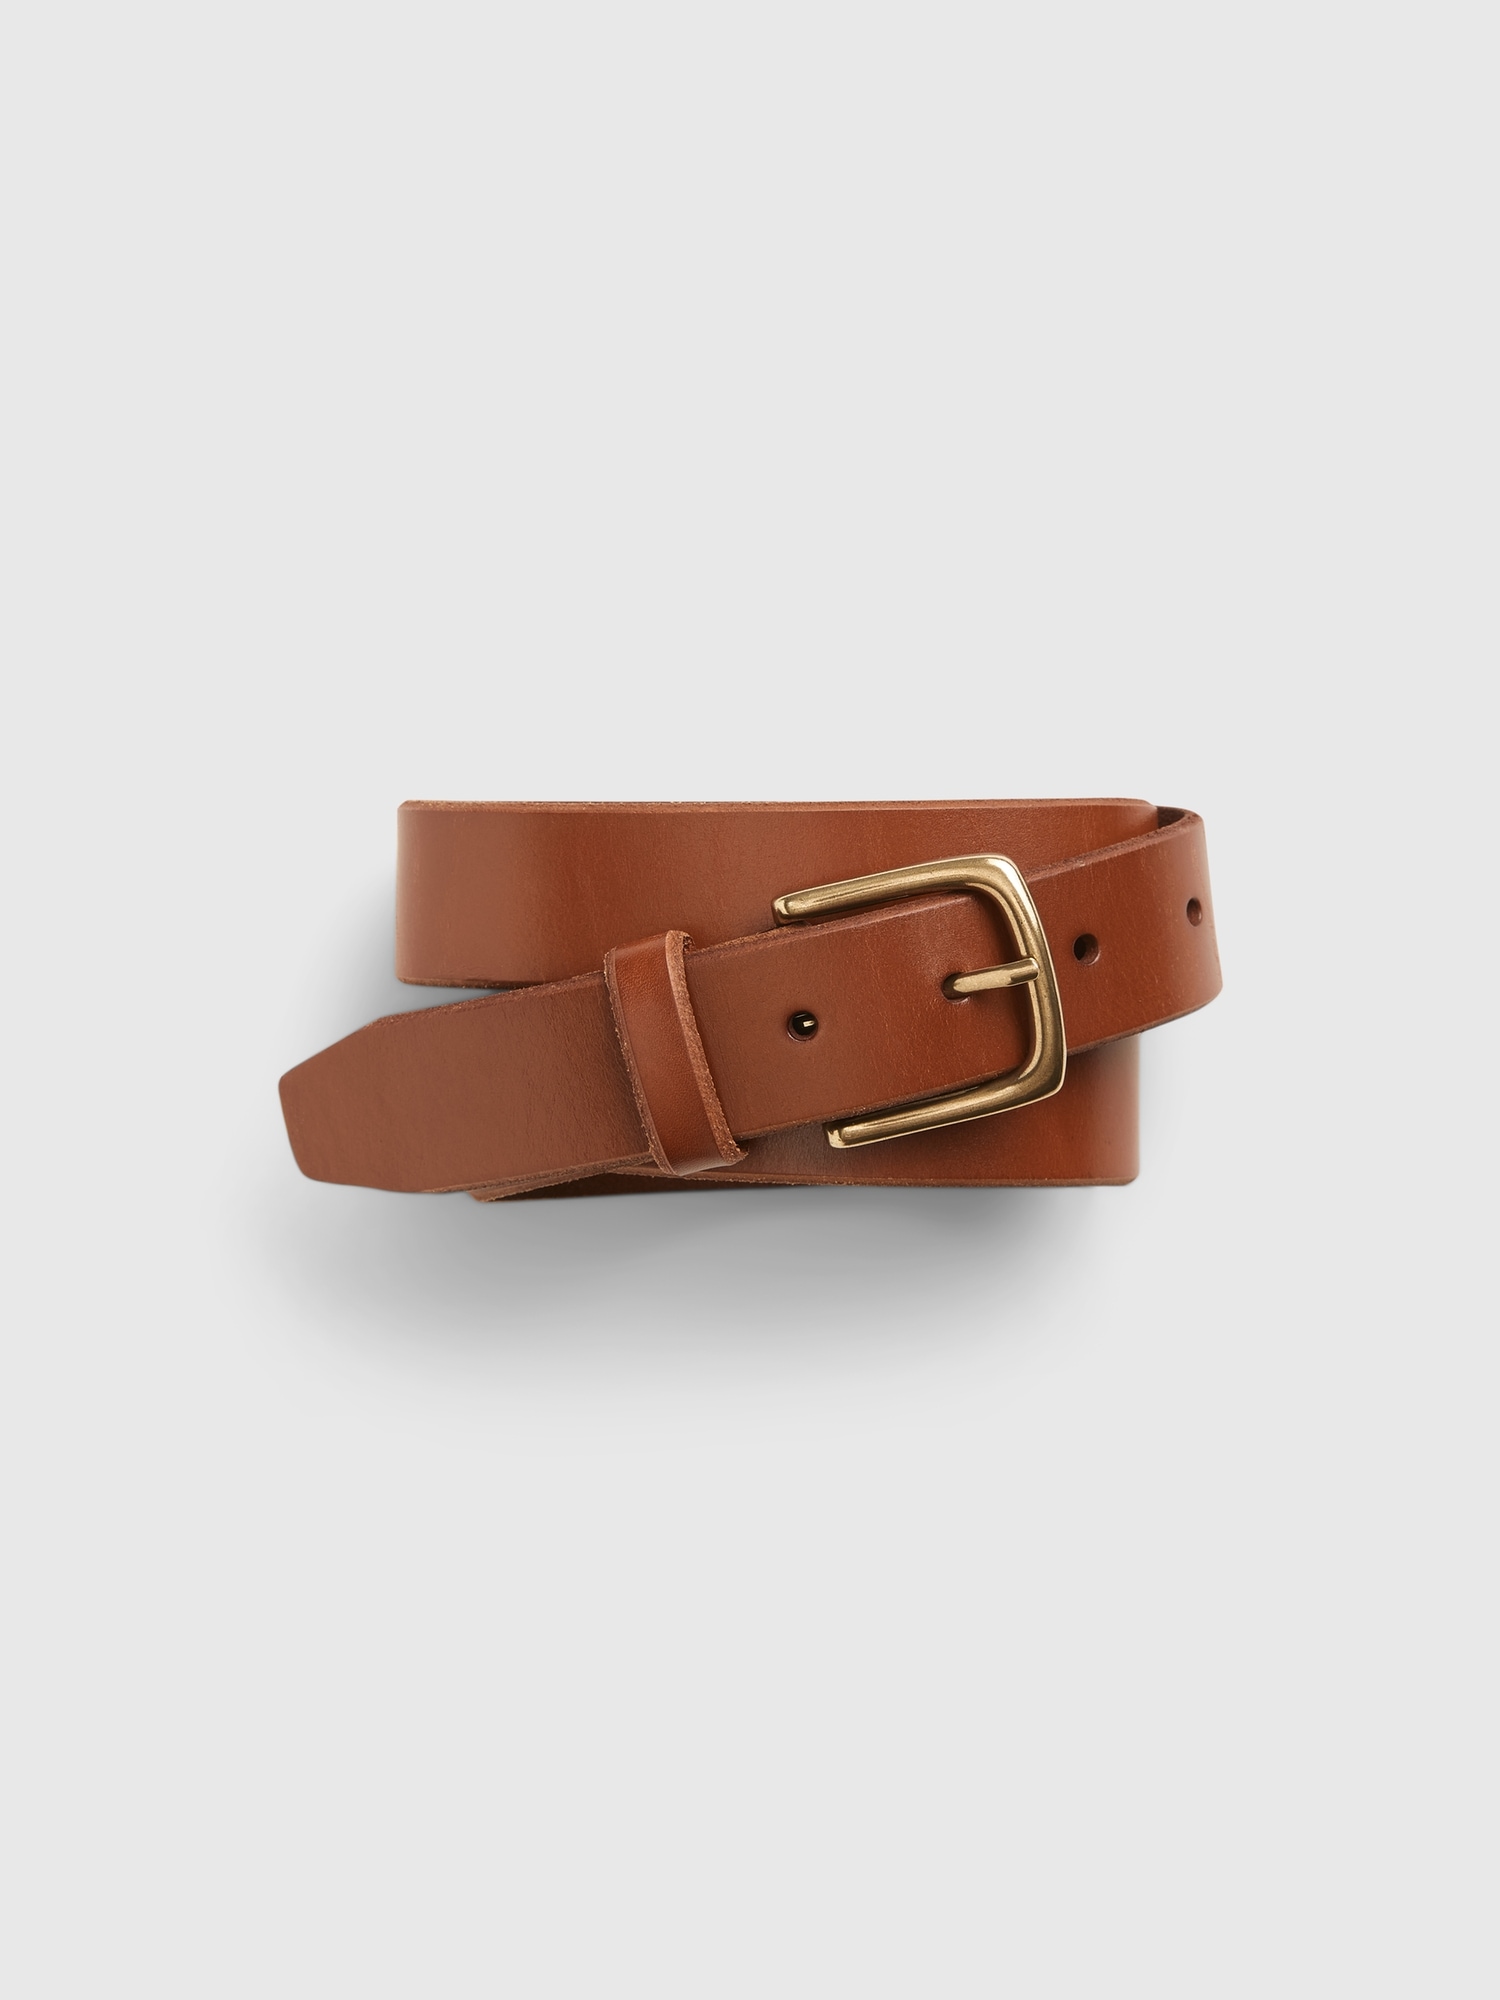 How to maintain your leather belt?